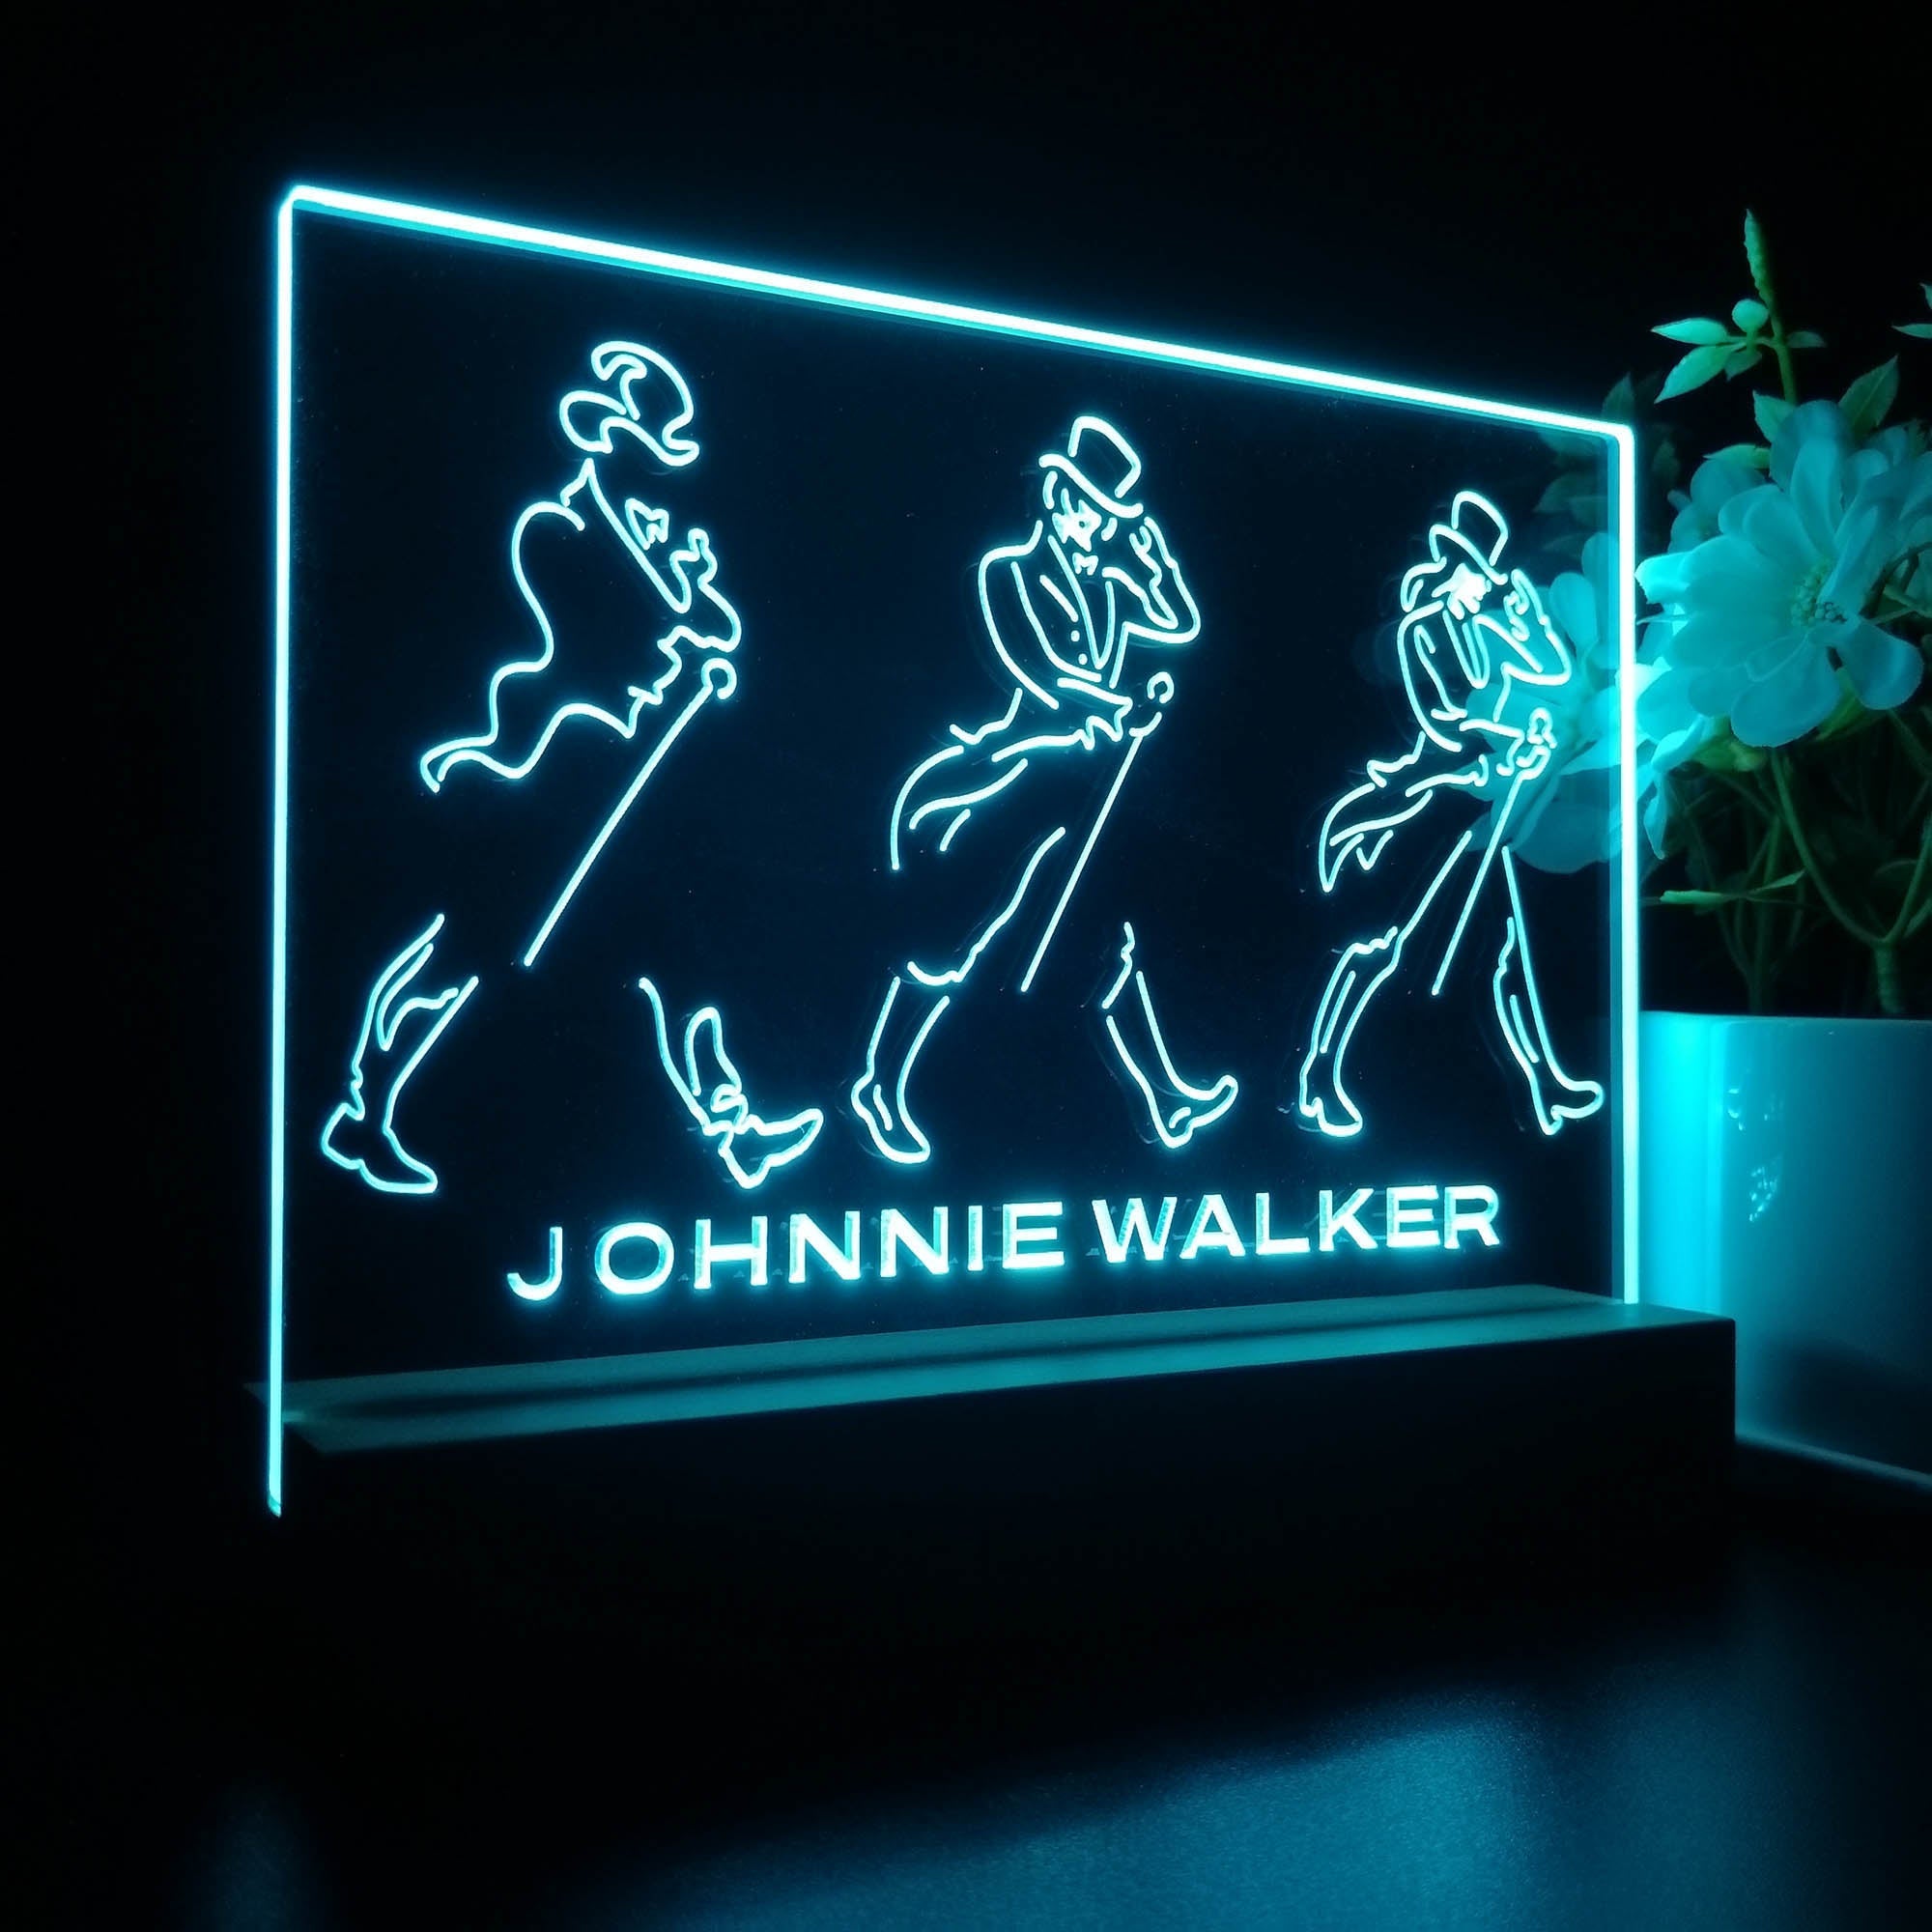 Johnnie Walkers Special Neon Sign Pub Bar Lamp